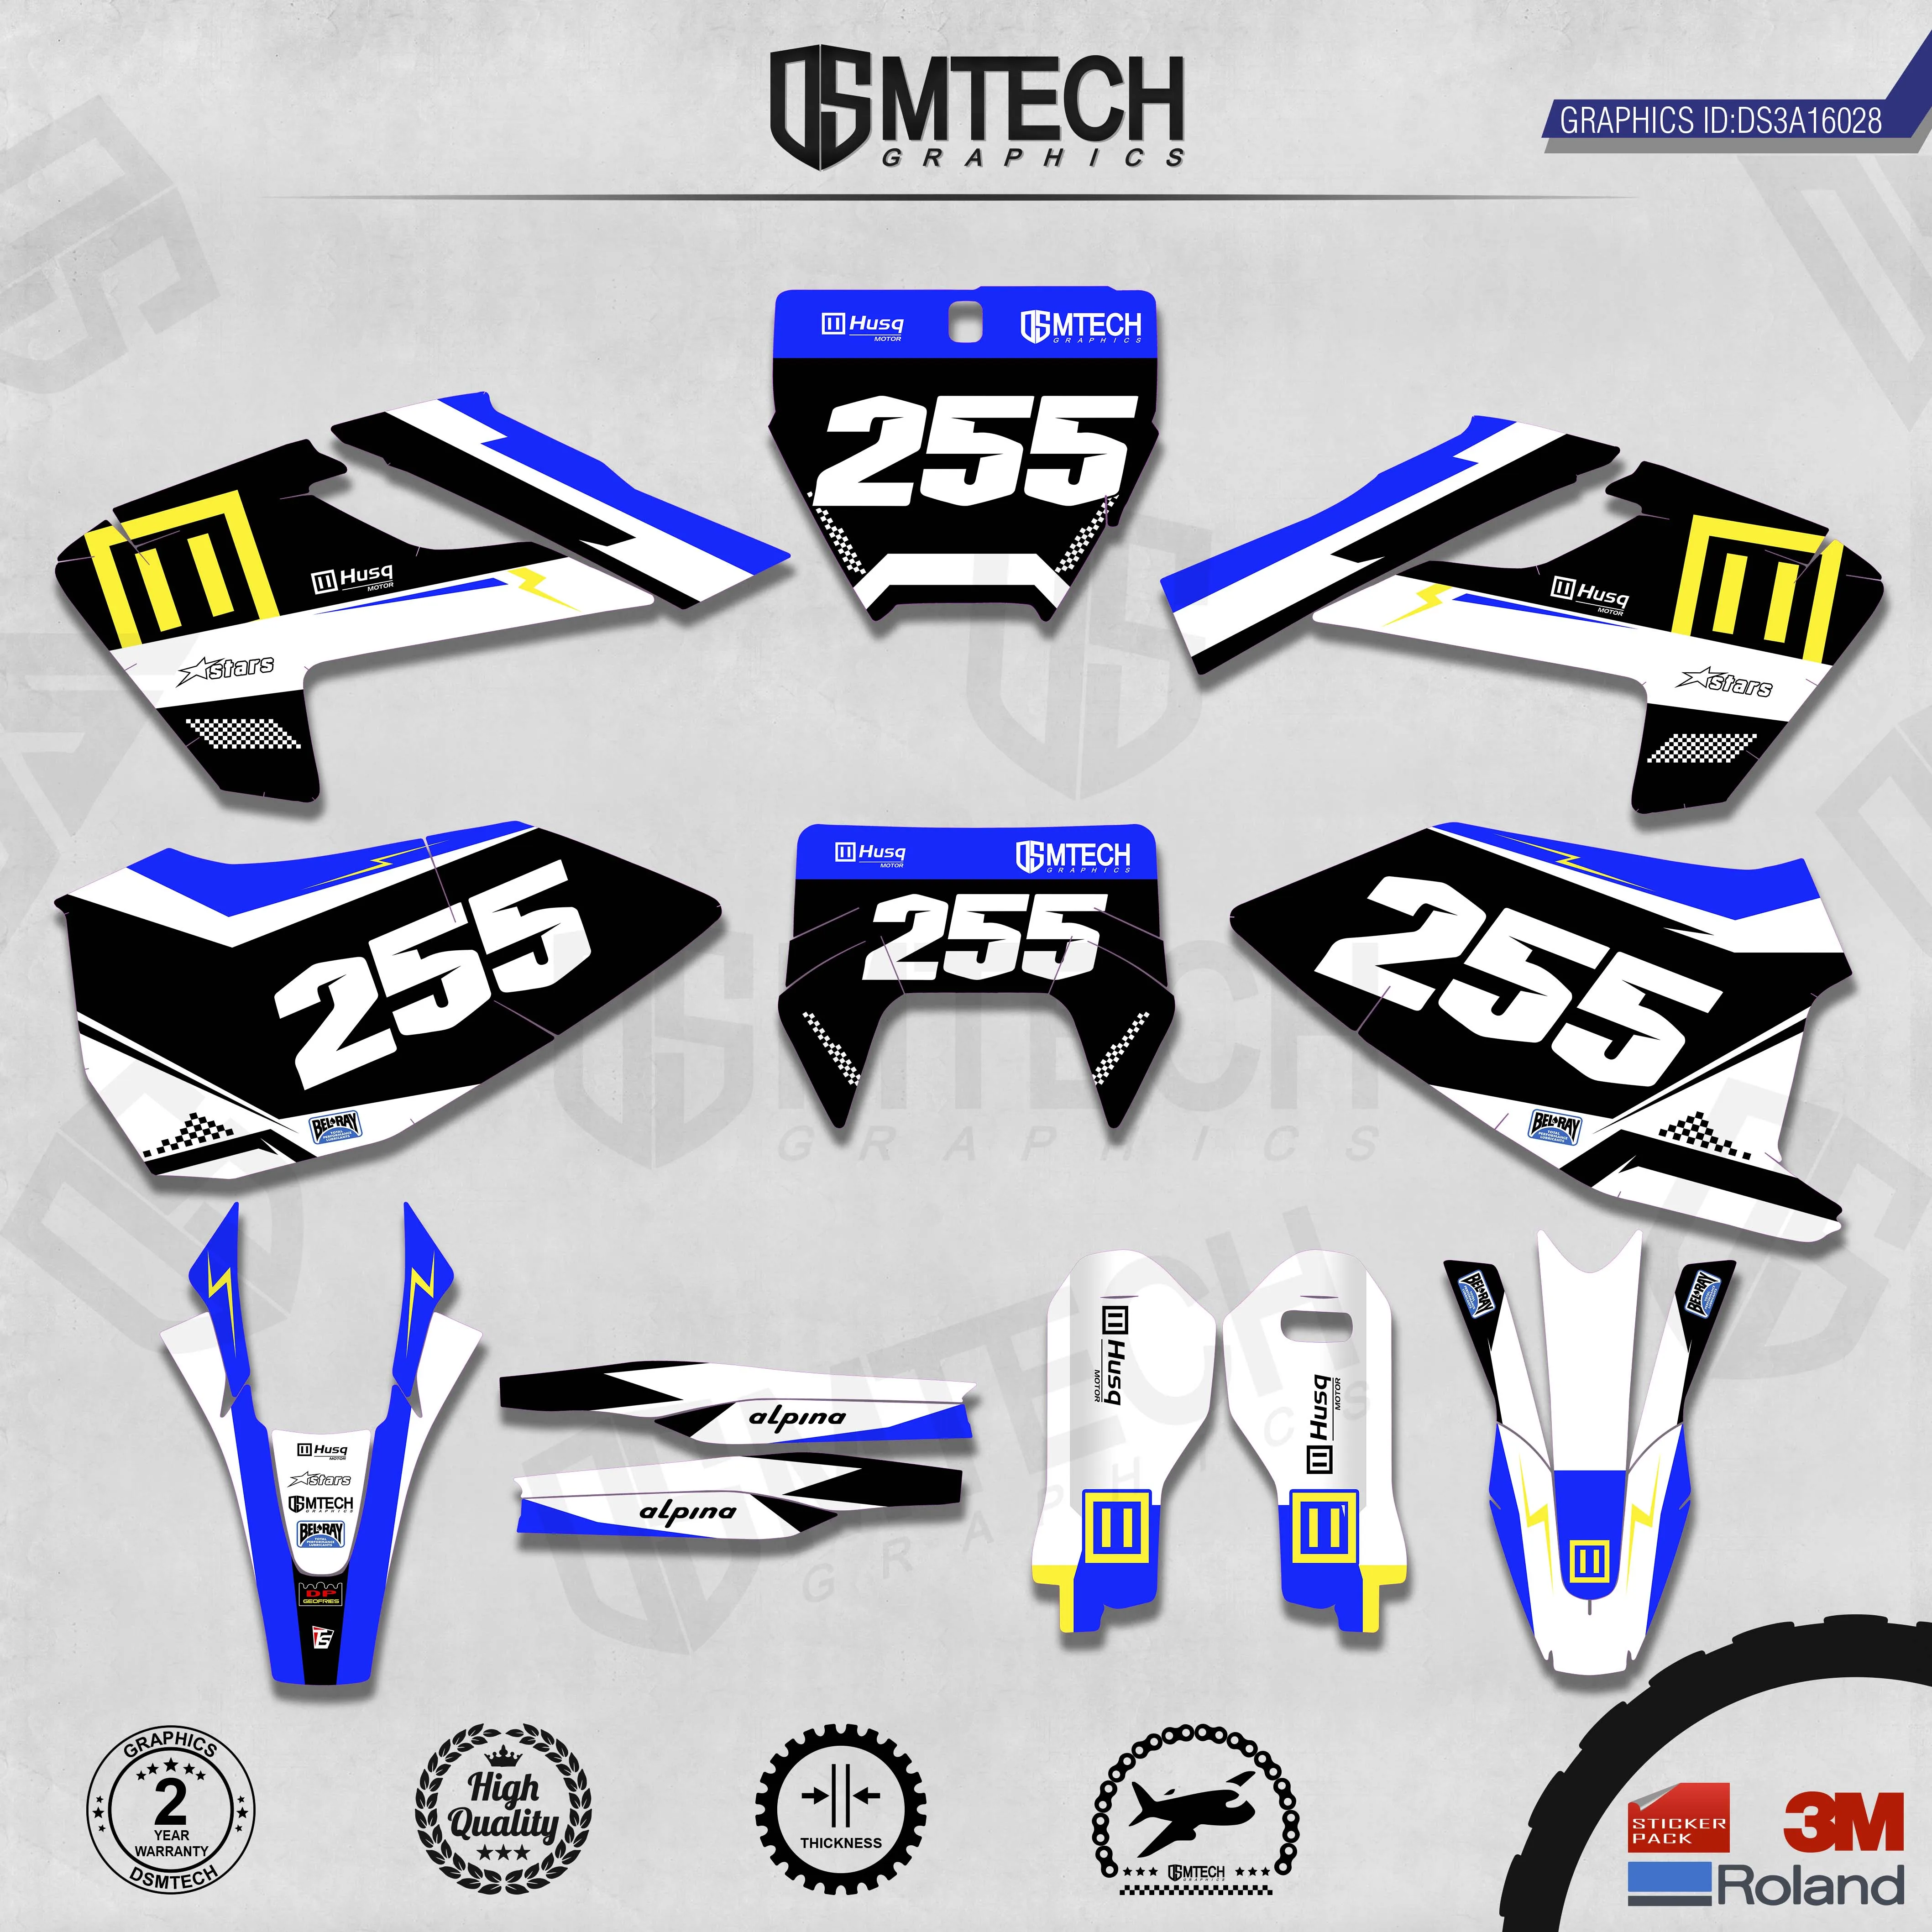 DSMTECH Customized Team Graphics Backgrounds Decals 3M Custom Stickers For TC FC TX FX FS 2016-2018  TE FE 2017-2019  028